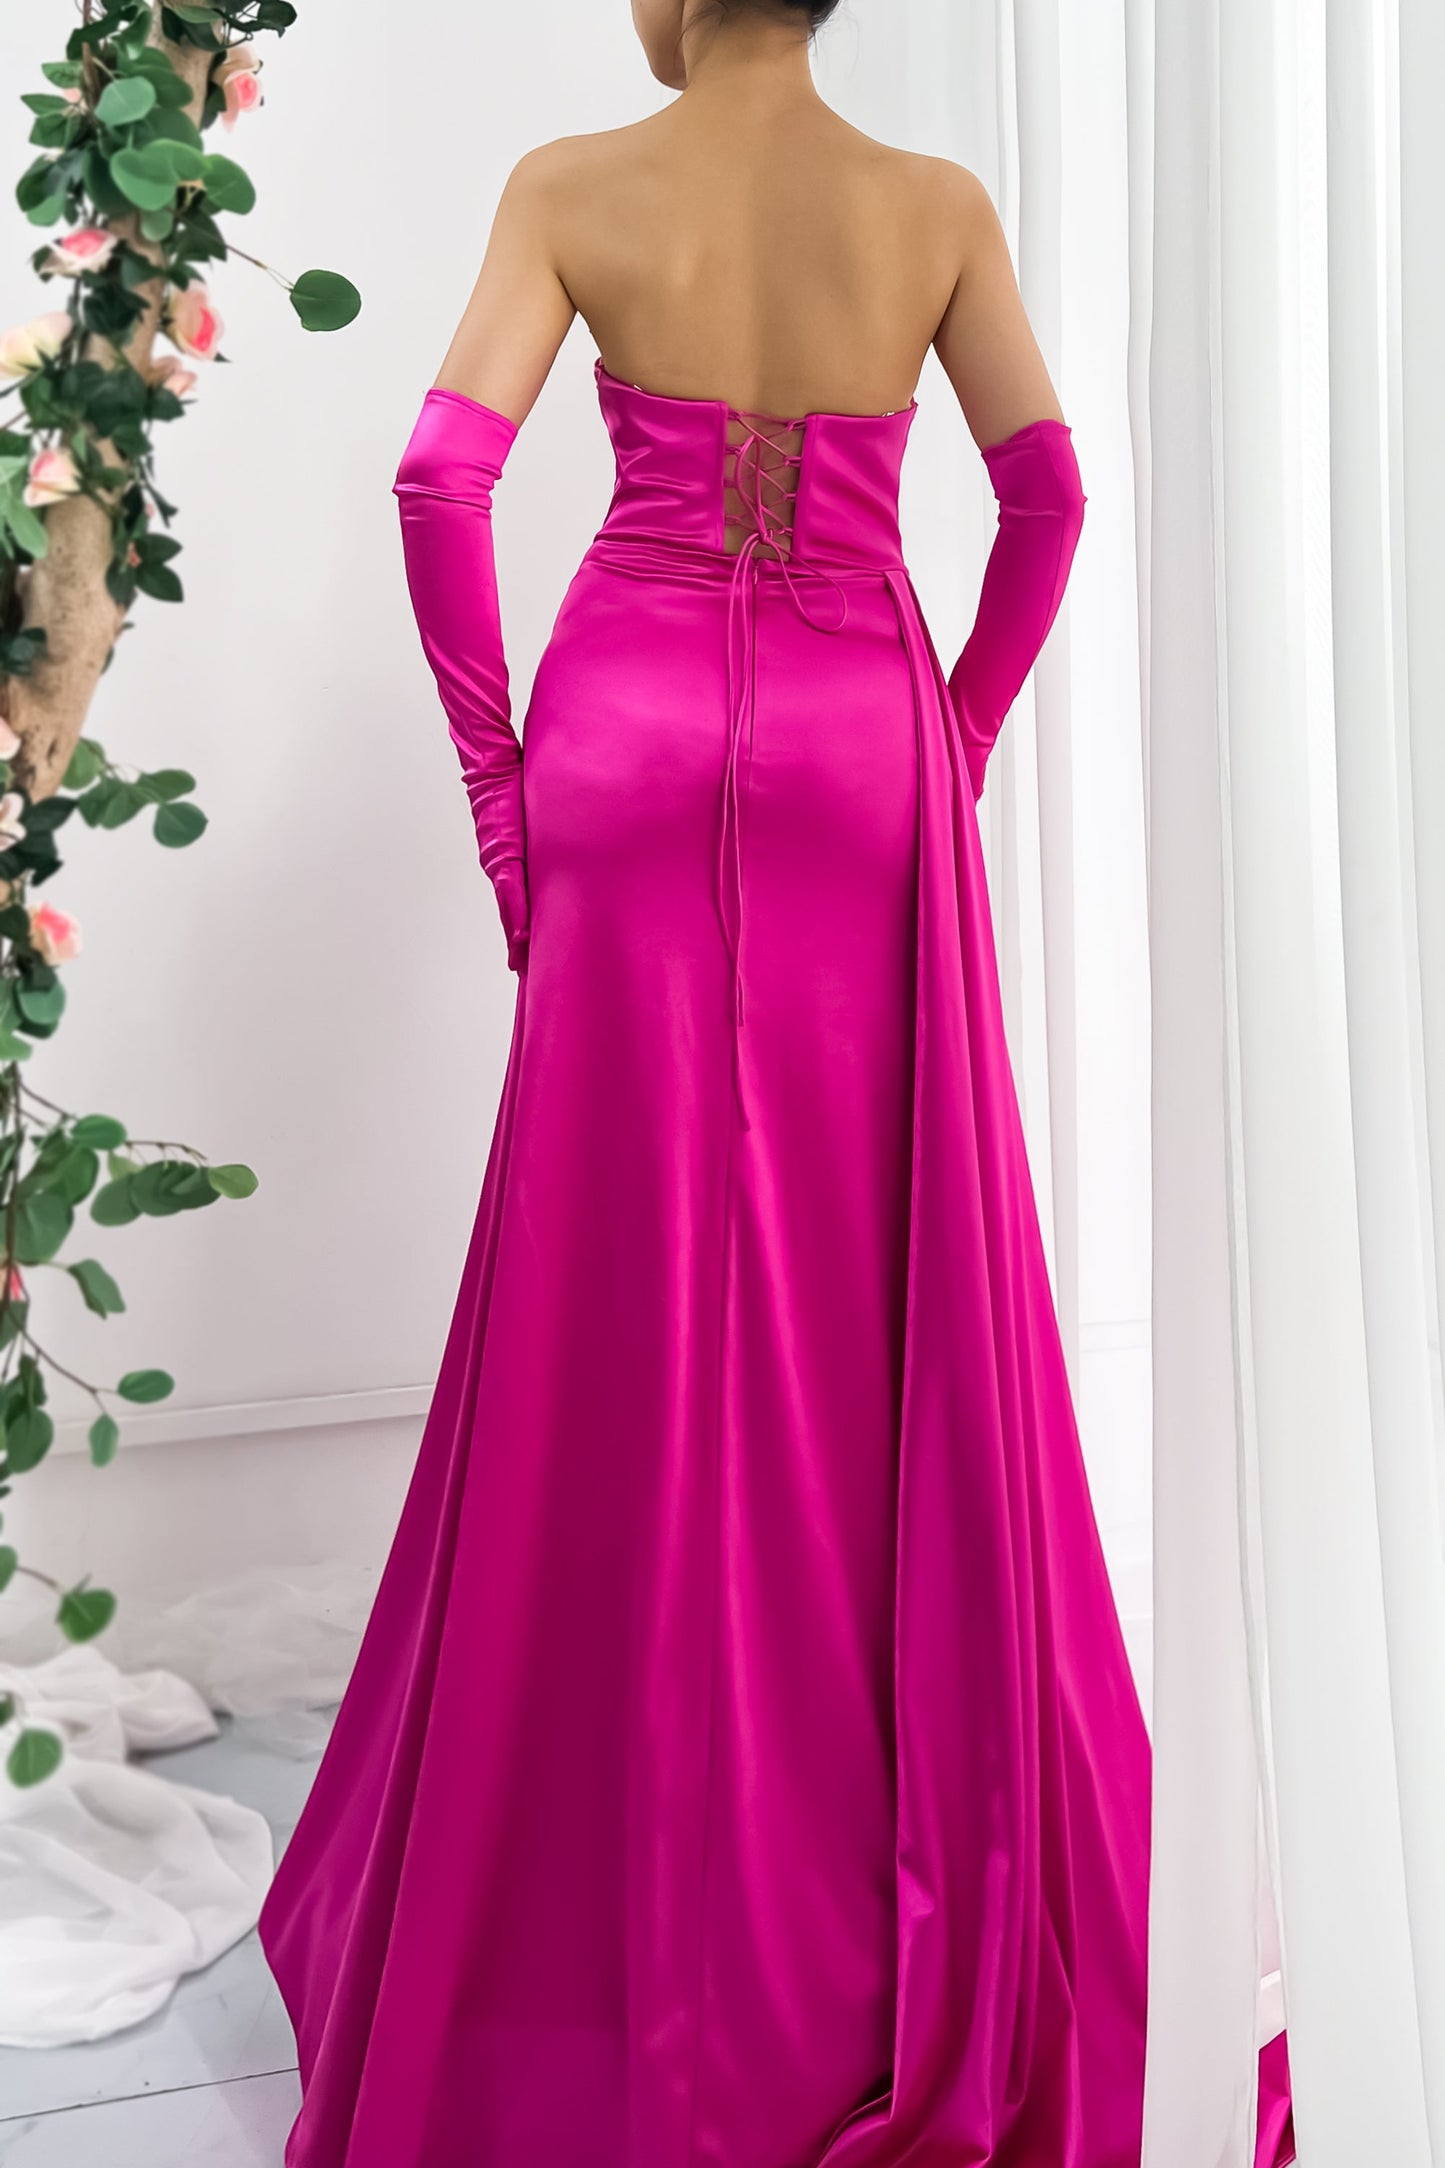 Mermaid Strapless Jersey Pink Dress with Gloves